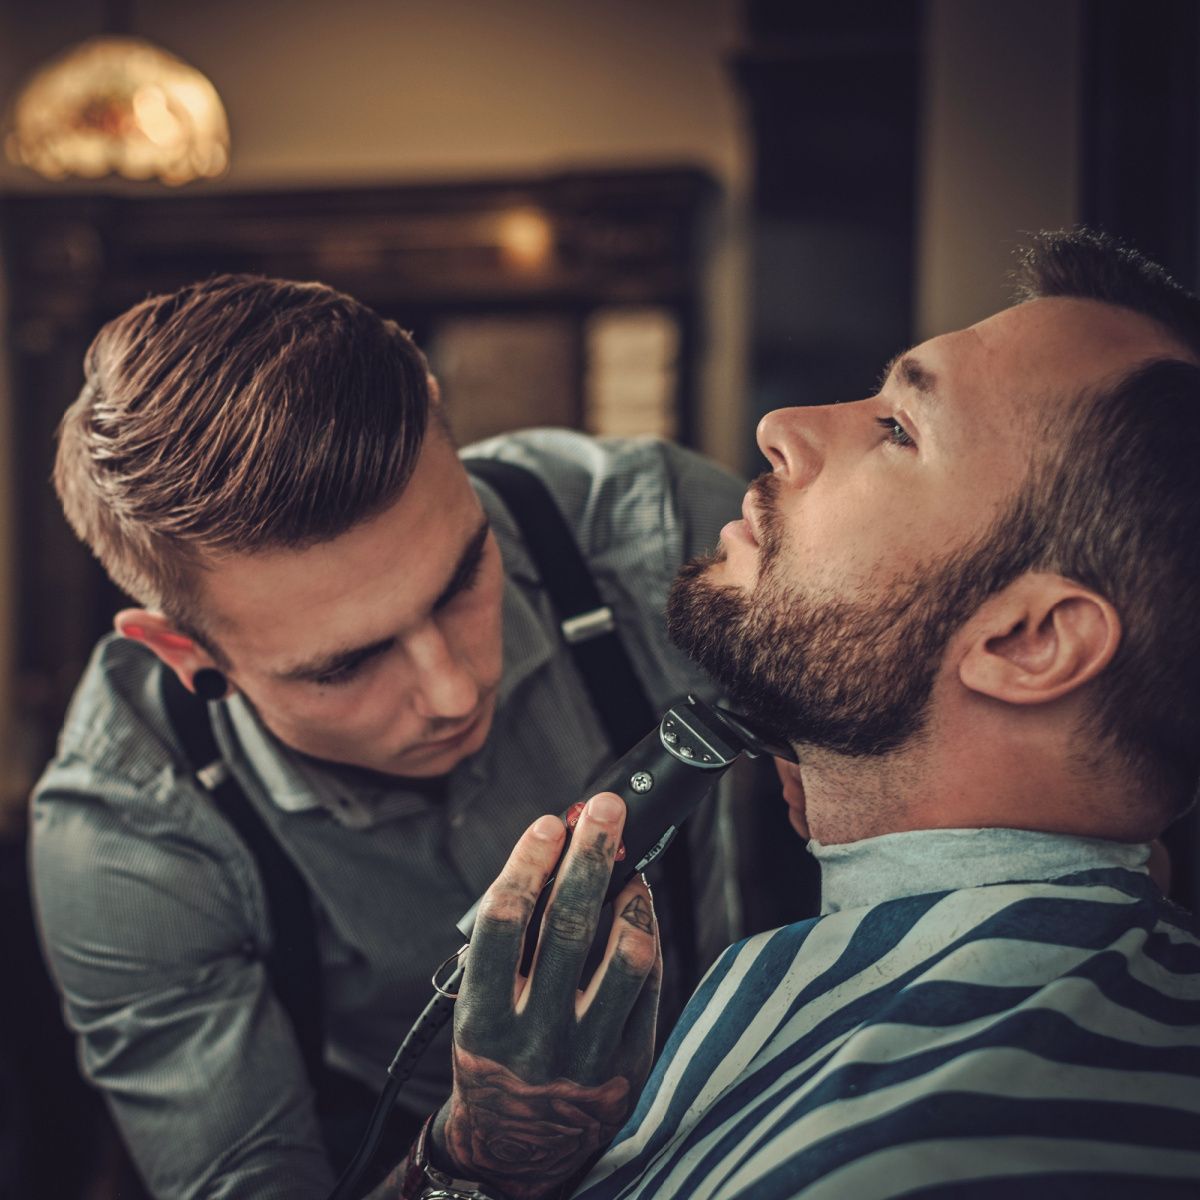 Observe these Houston barber shop etiquette for a better experience.